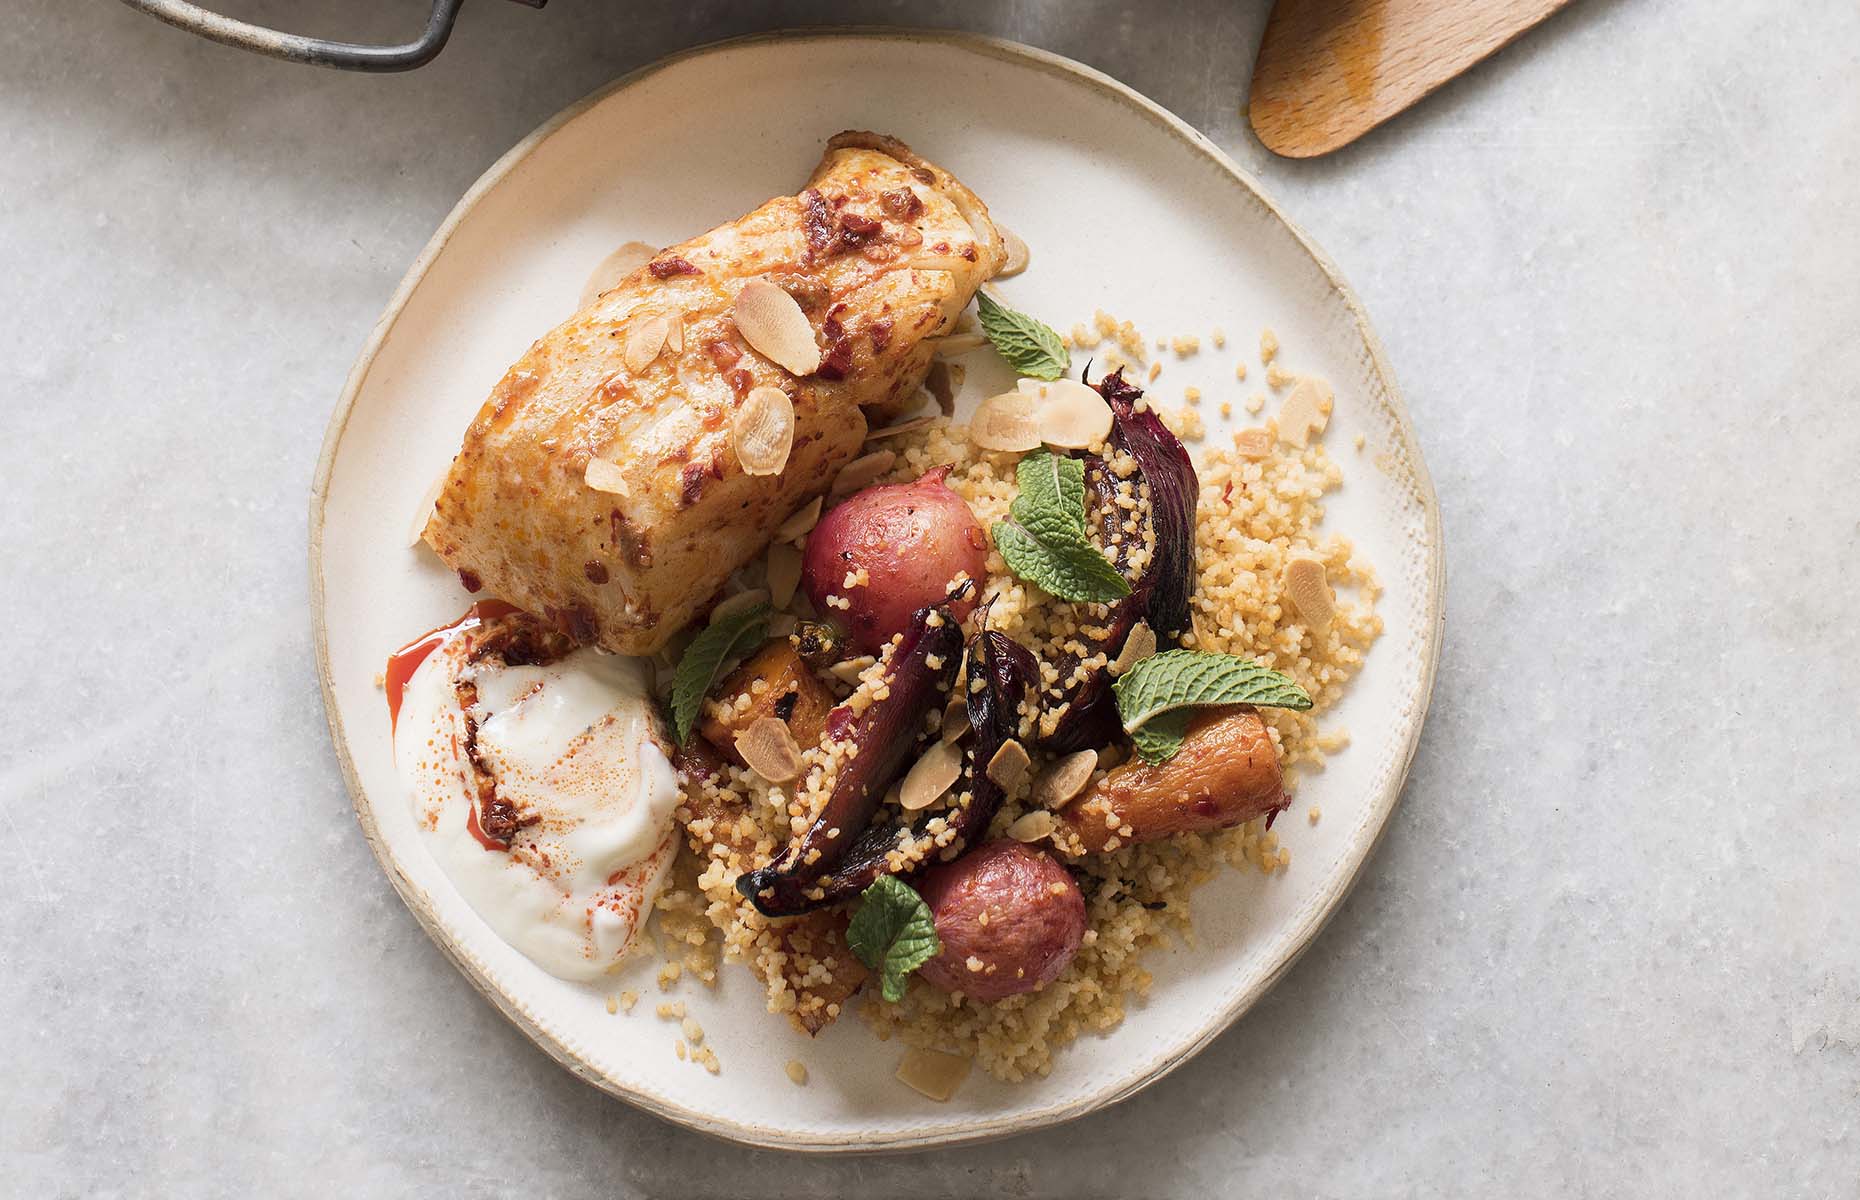 Harissa baked fish with cous cous (Image: The Flexible Pescatarian/White Lion Publishing)